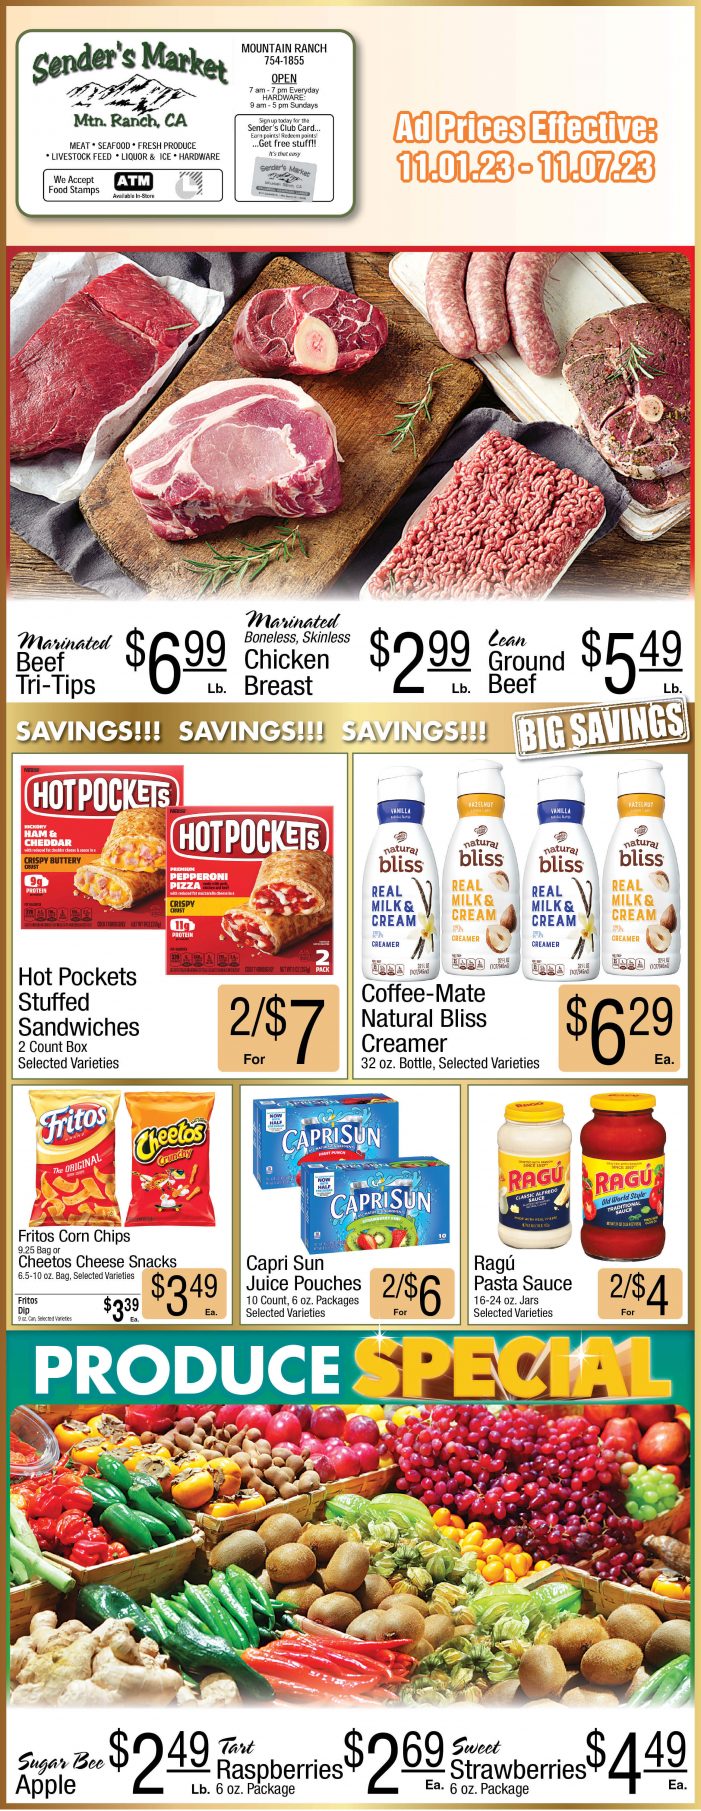 Sender’s Market Weekly Ad & Grocery Specials Through November 7th! Shop Local & Save!!